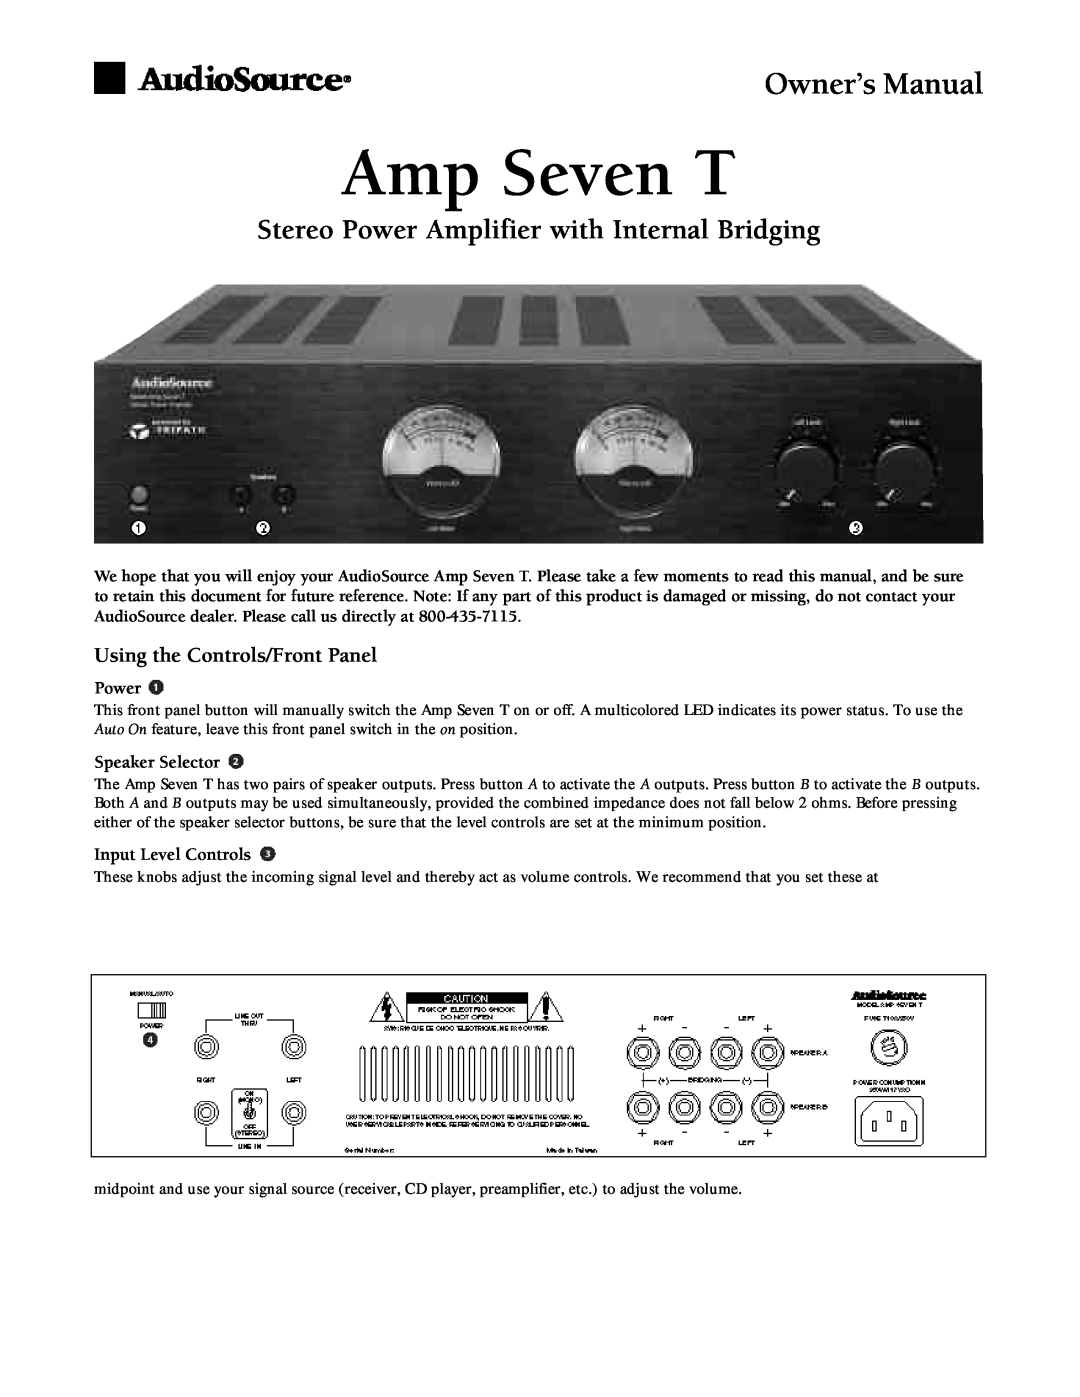 AudioSource Amp Seven T owner manual Stereo Power Amplifier with Internal Bridging, Using the Controls/Front Panel 